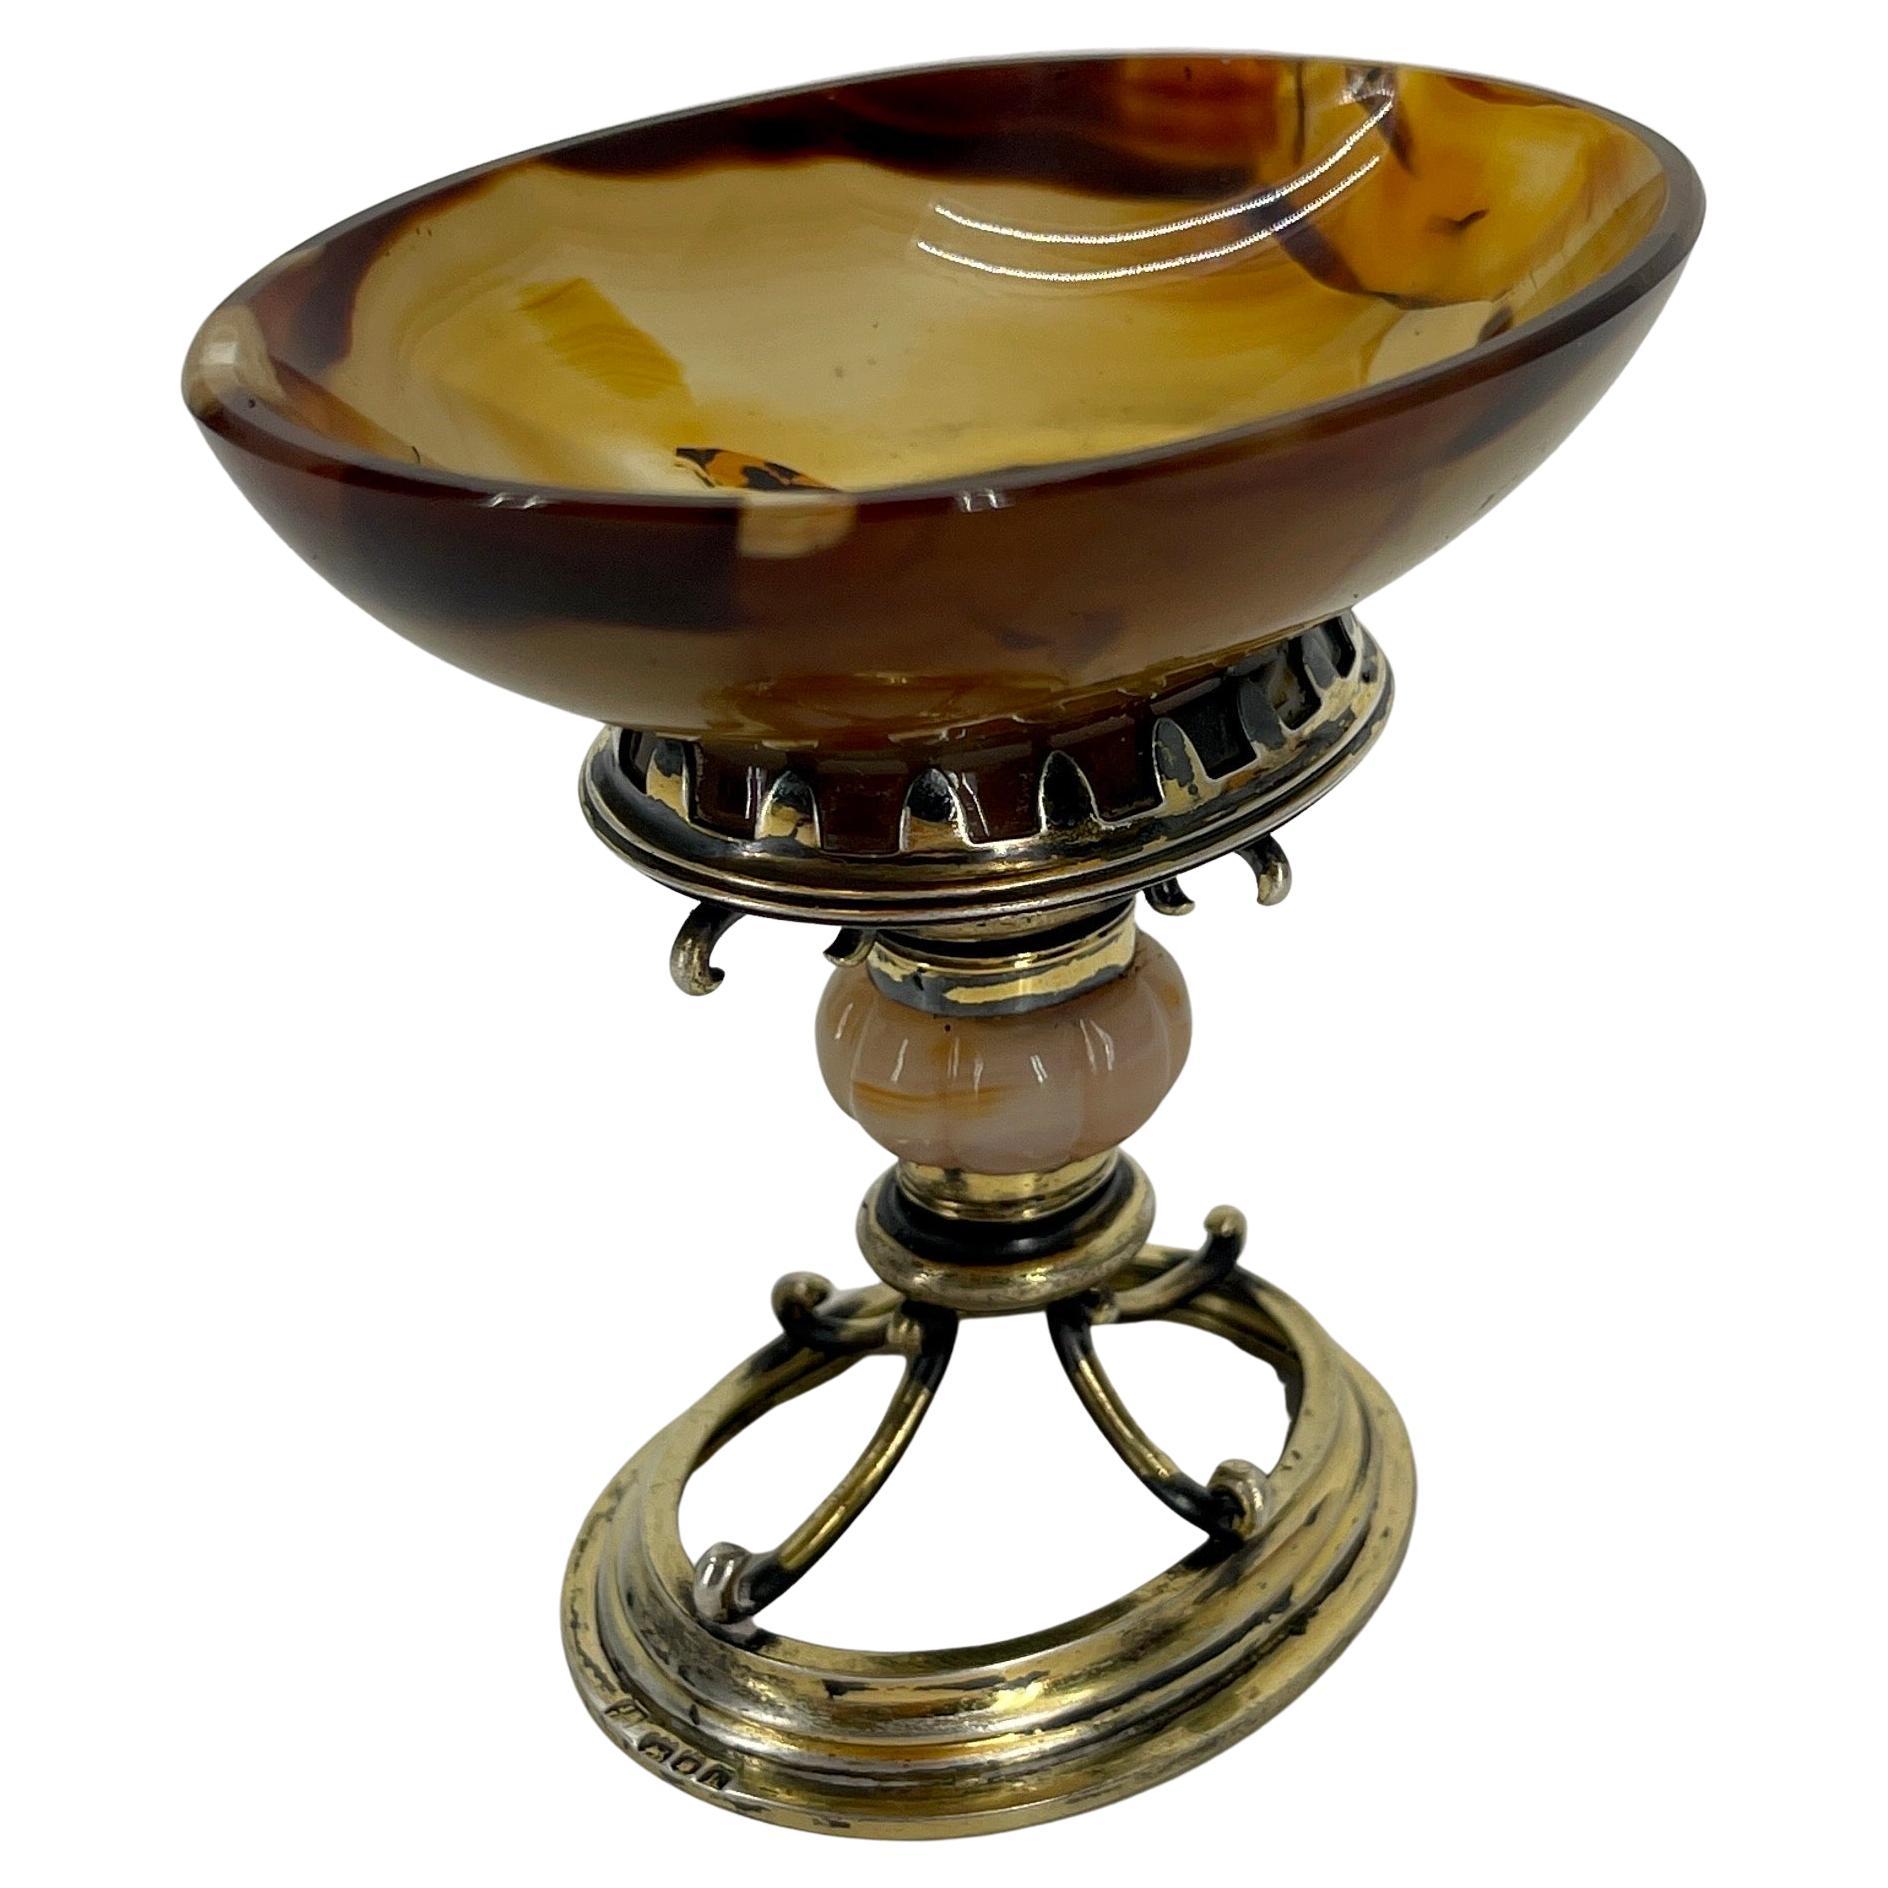 Early English Agate and Gilt Sterling Silver Jar Bowl or Salt Cellar